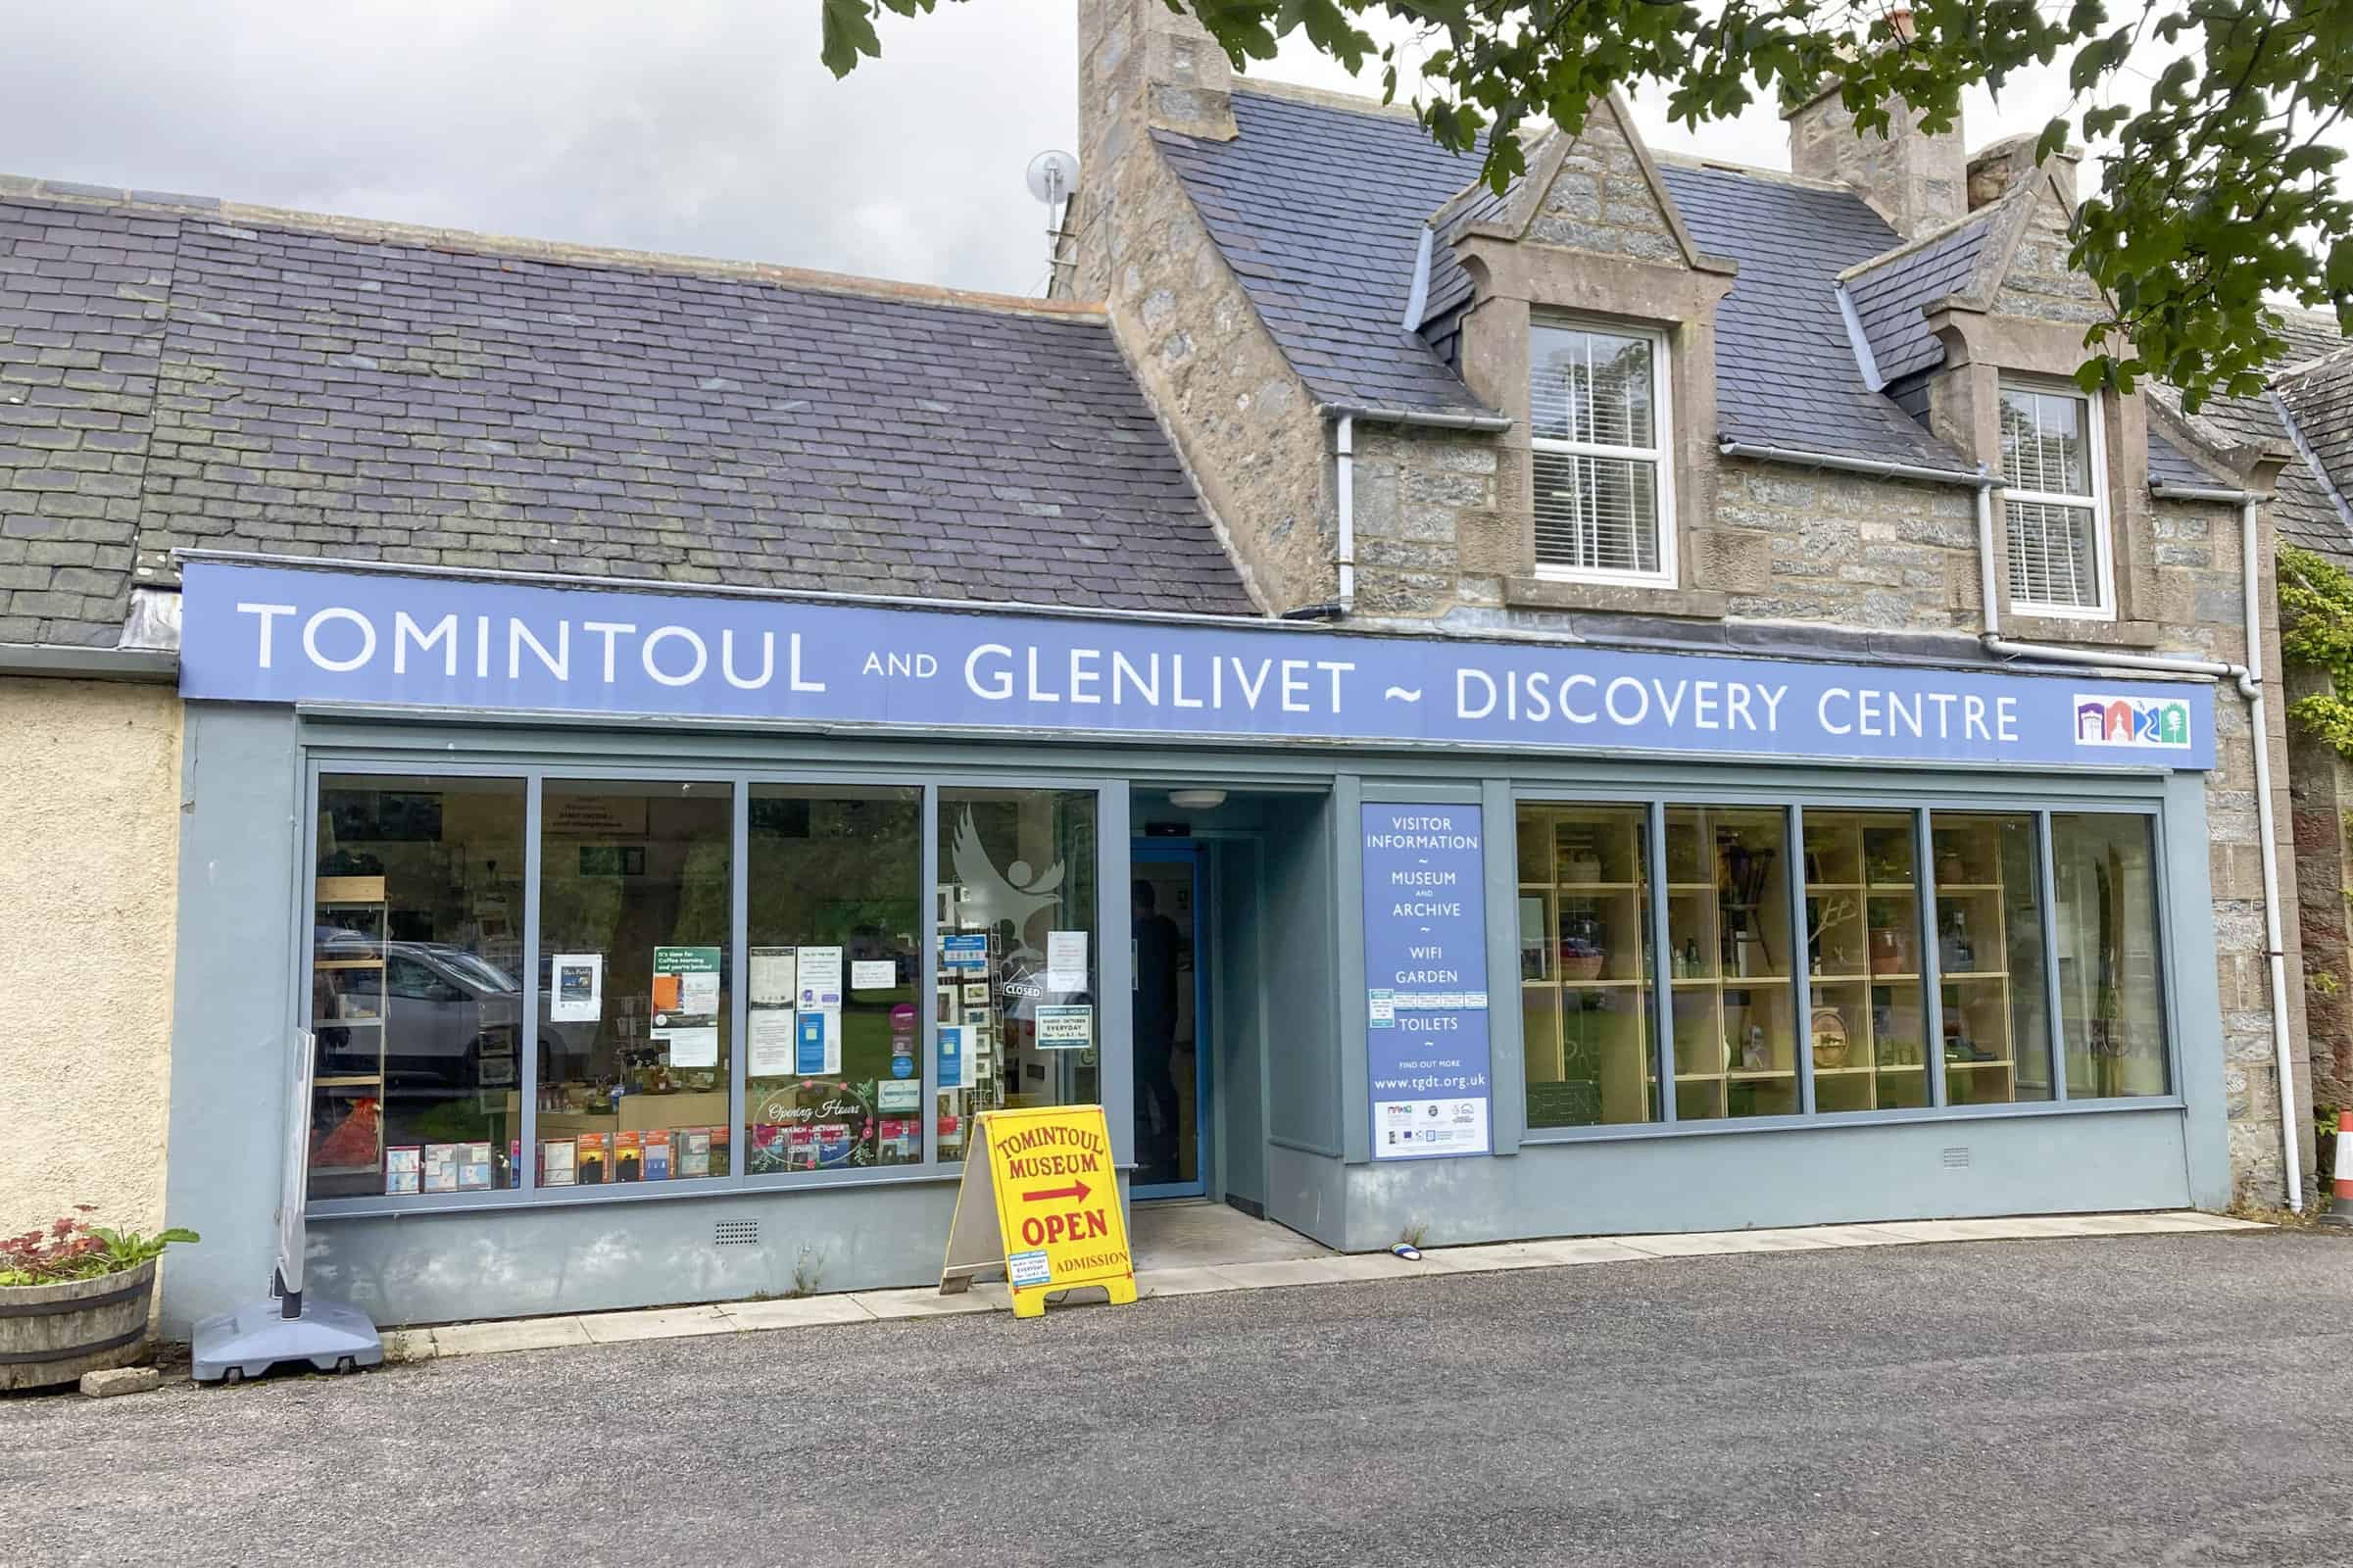 Tomintoul and Glenlivet Discovery Centre